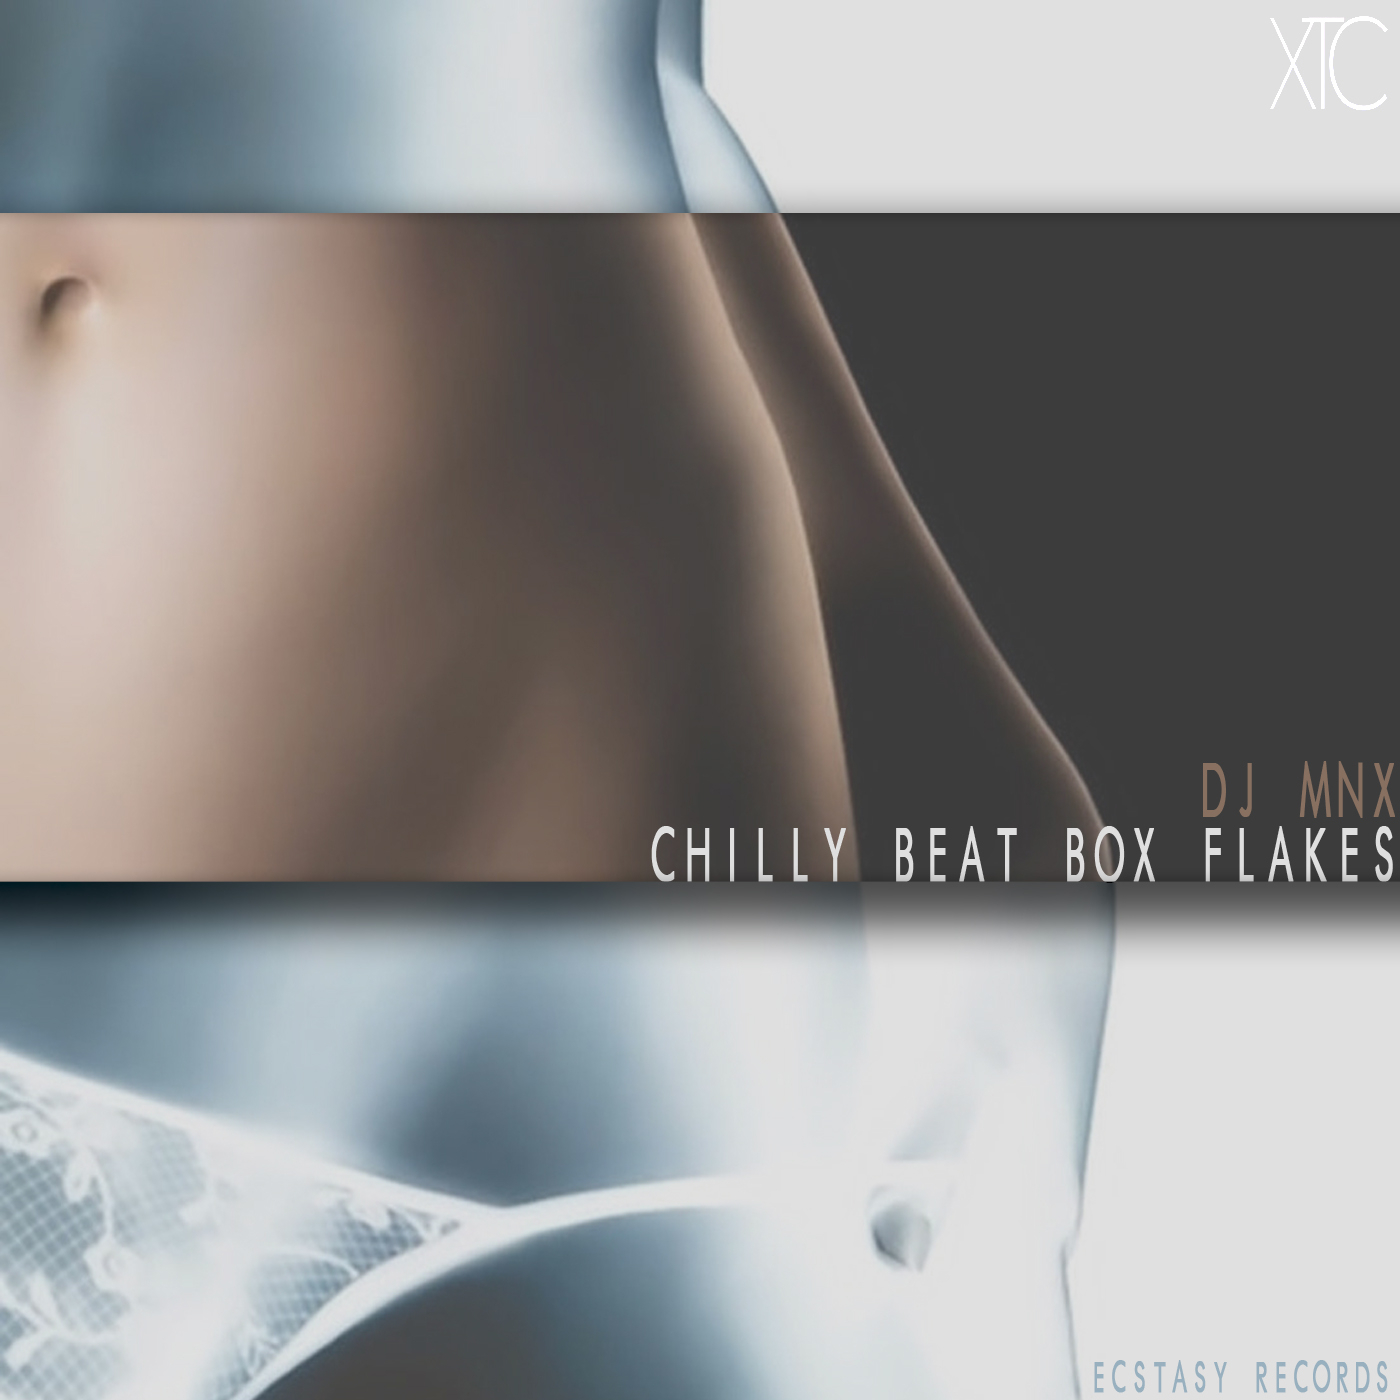 Chilly Beat Box Flakes